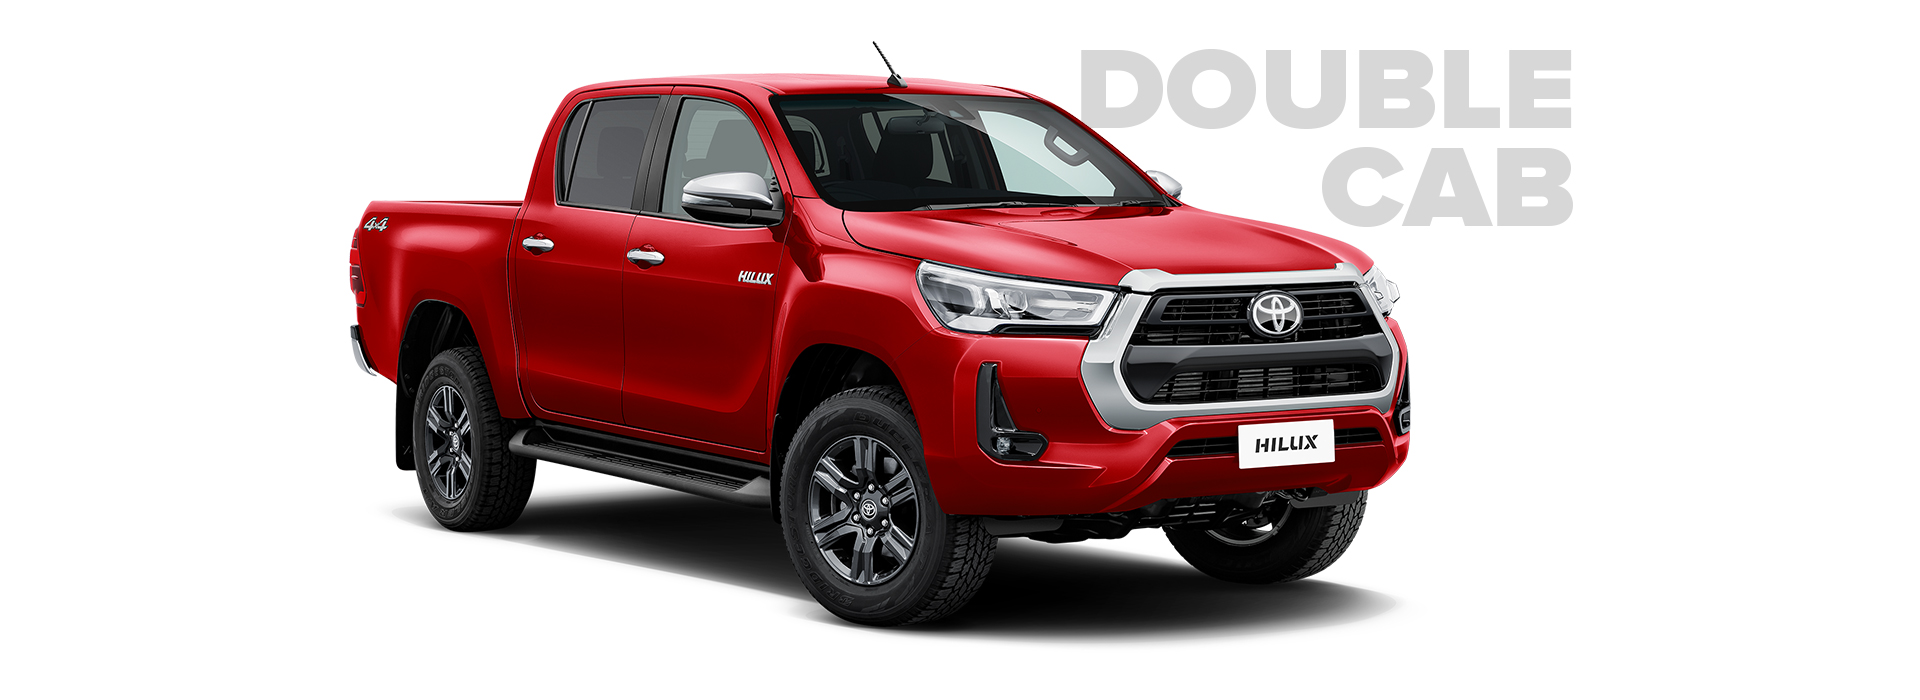 Toyota_Hilux_Double_Cab_1920x700